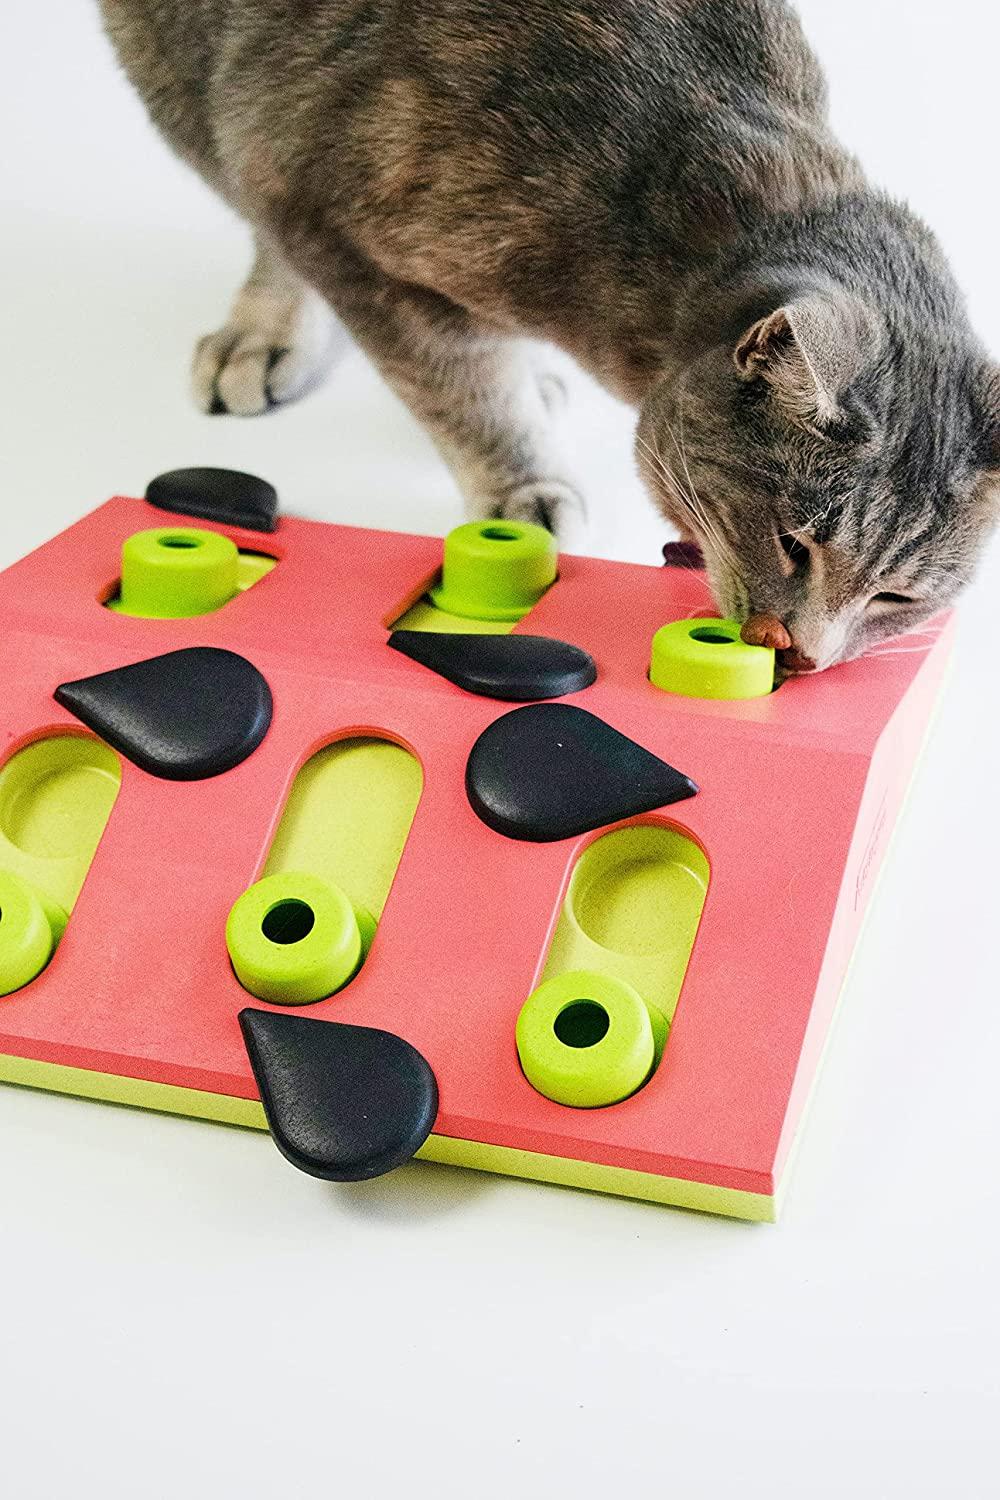 Nina Ottosson by Outward Hound Buggin' Out Puzzle & Play Cat Toy